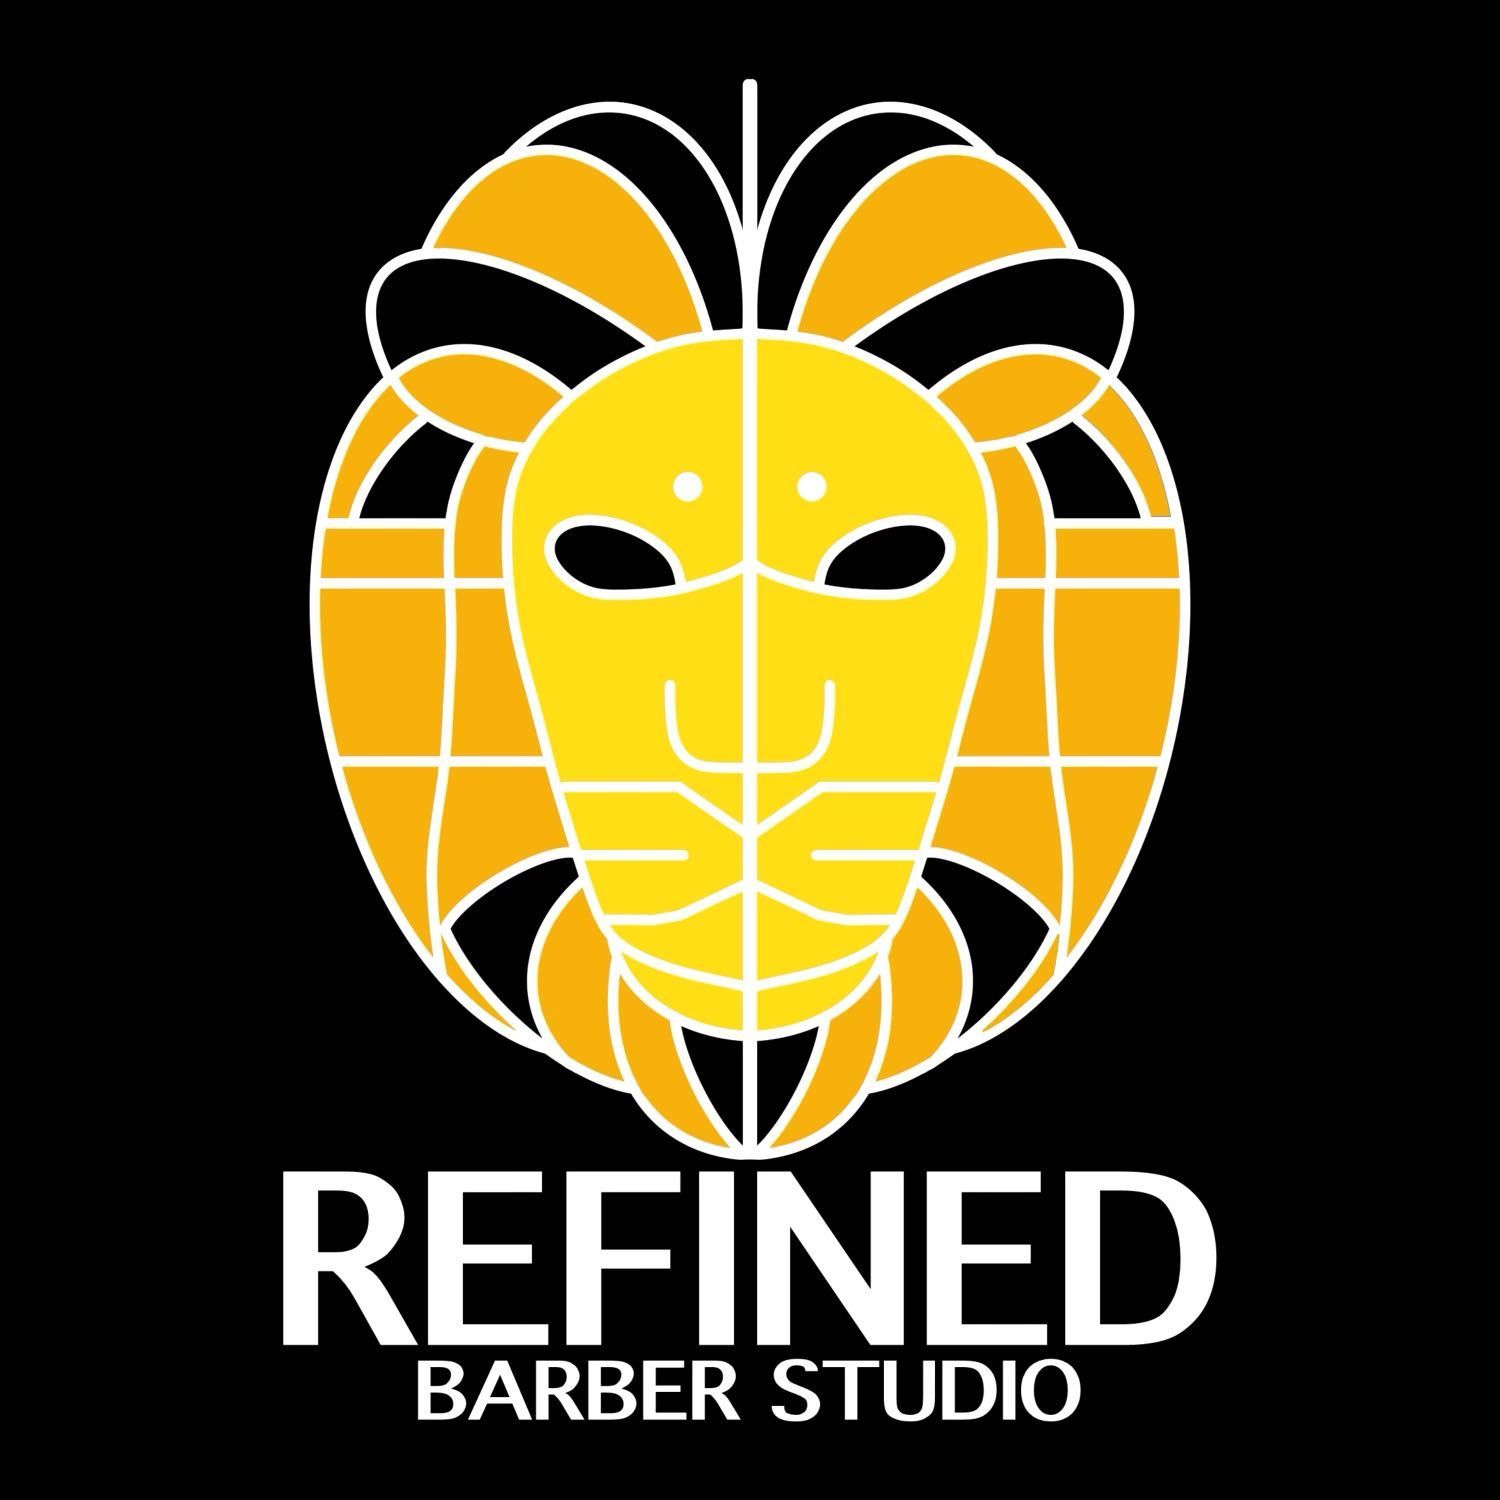 Refined Barber Studio, 2807 S Dixie Hwy, Suite 37, West Palm Beach, 33405